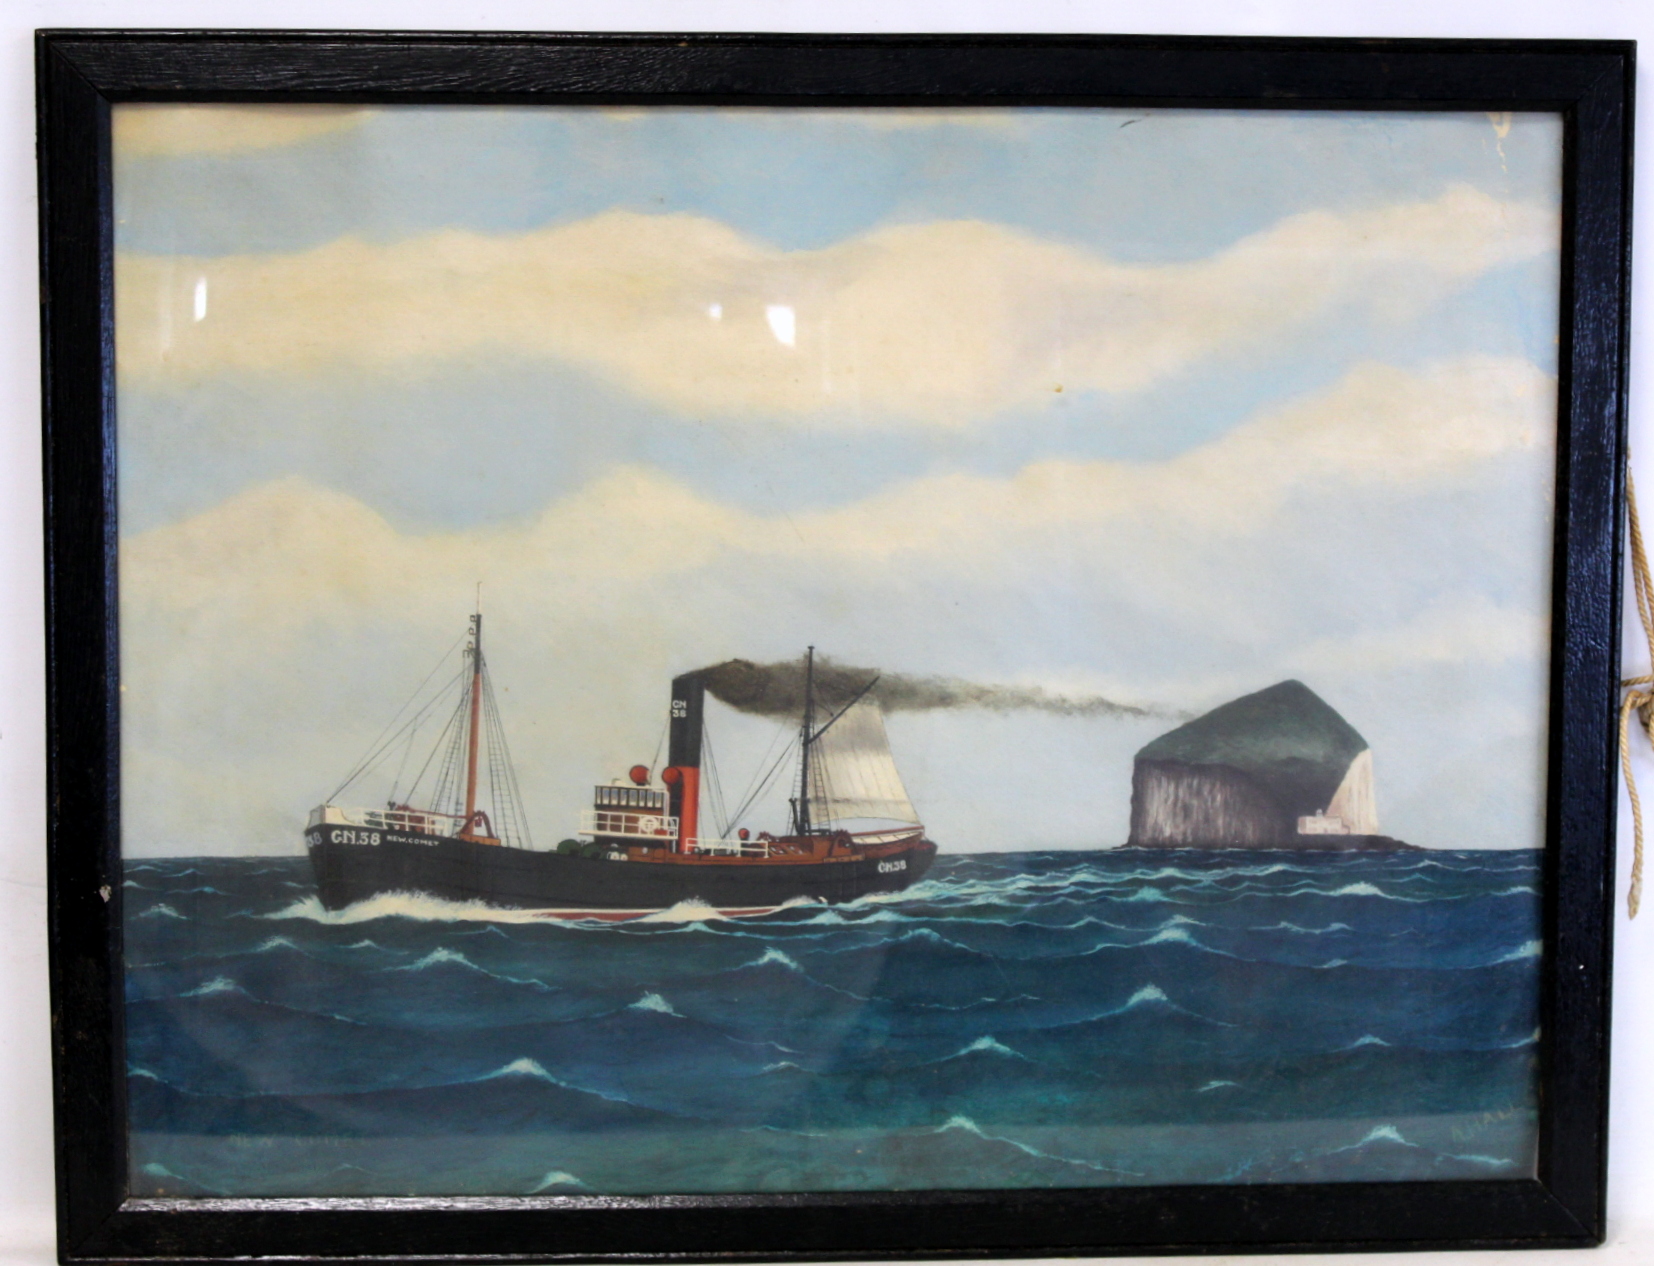 A HALL (2OTH CENTURY NAIVE SCHOOL)."New Comet" - a puffer rounding the Bass Rock.Oil on canvas